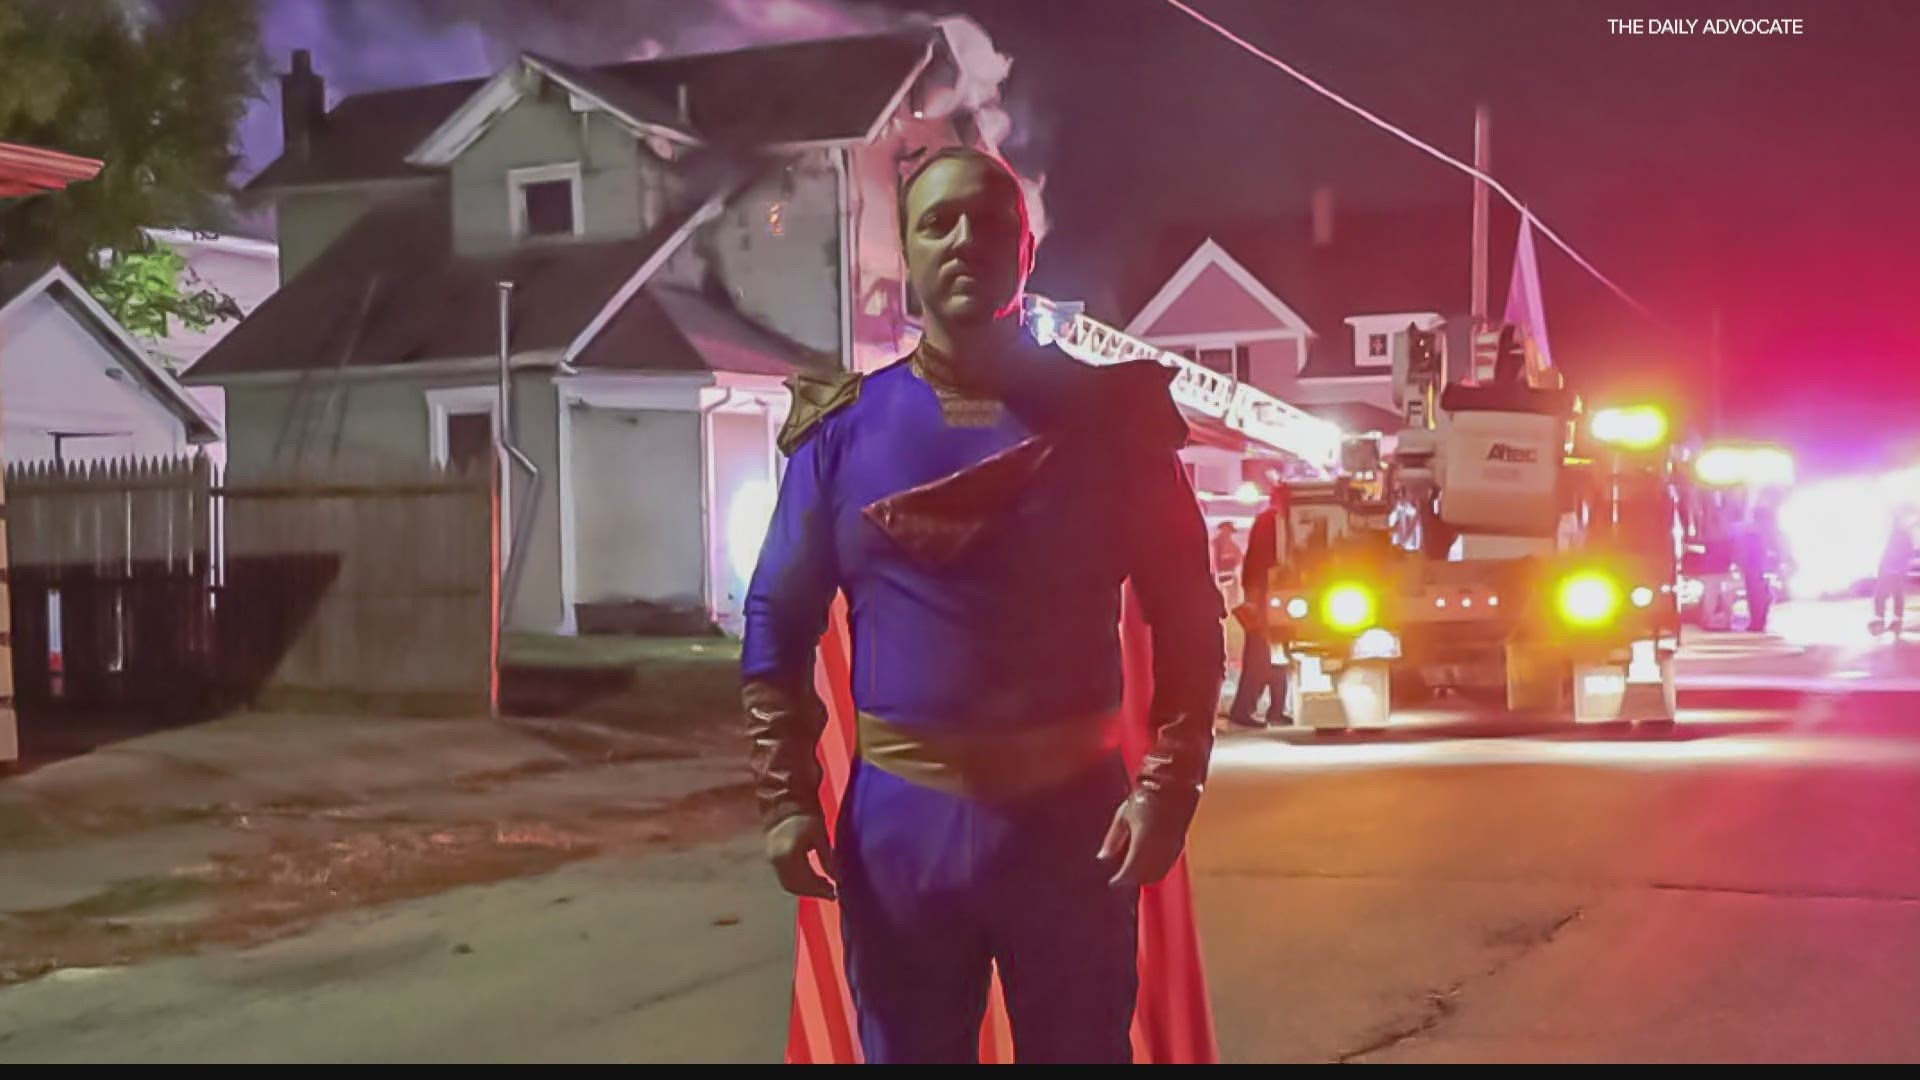 A Greenville, Ohio man is alive because of the heroic actions of a man in costume.